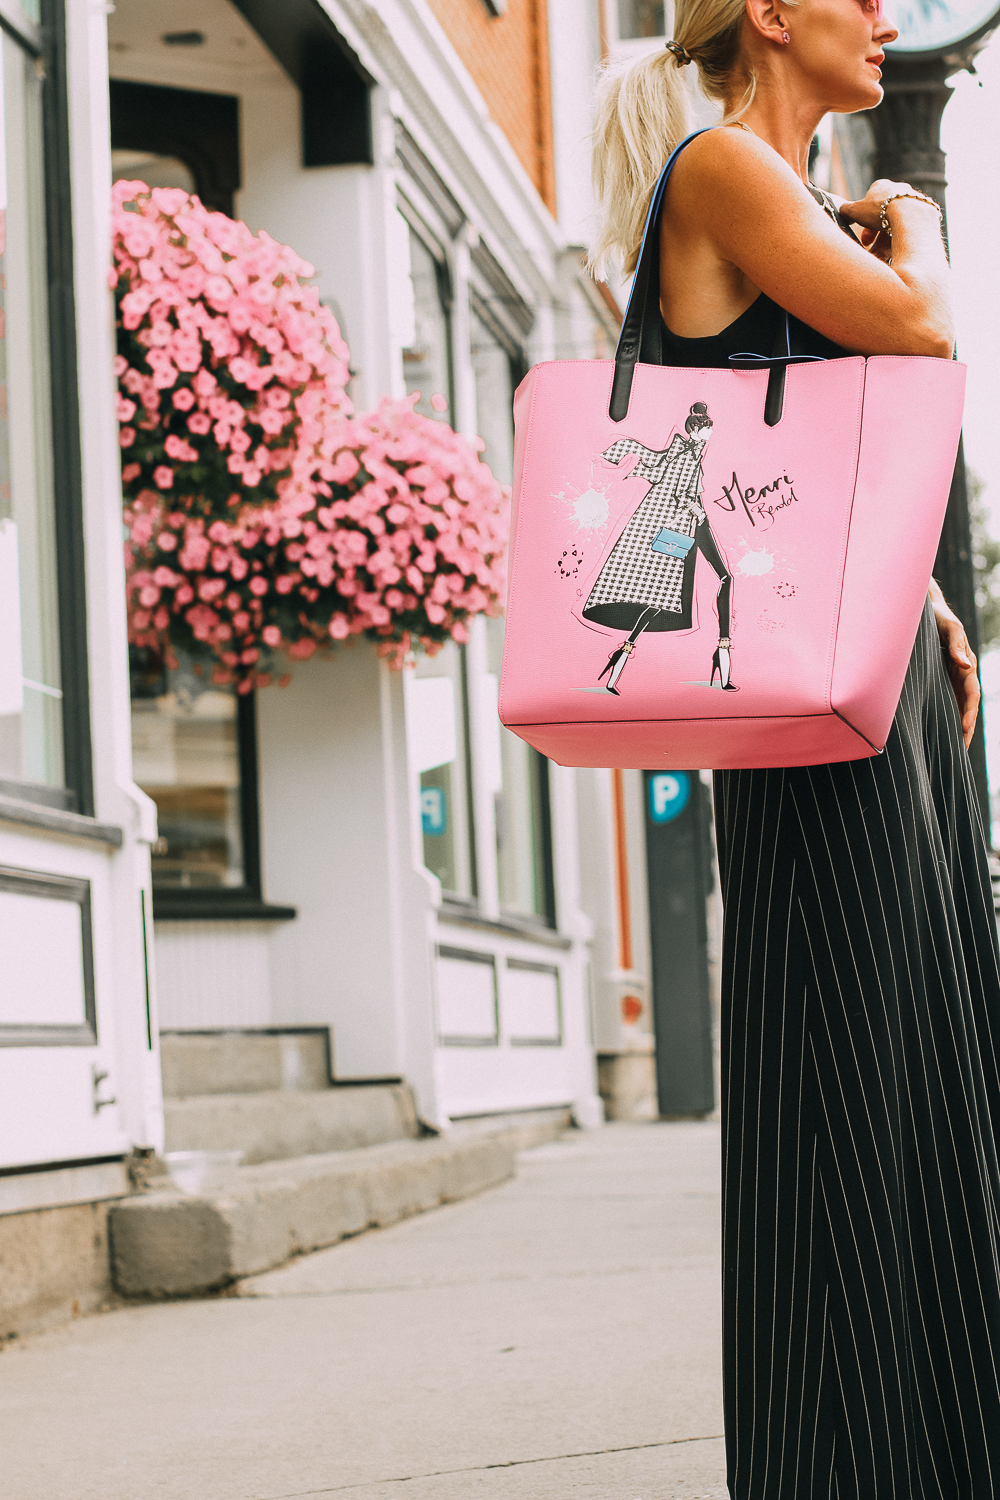 Fall Statement Handbags 2018, this pink Henri Bendel tote is the perfect fall shopping tote! It's SO cute and fun and will fit everything paired with a Joie leather jacket, and pink sunglasses, striped Norma Kamali elephant pants